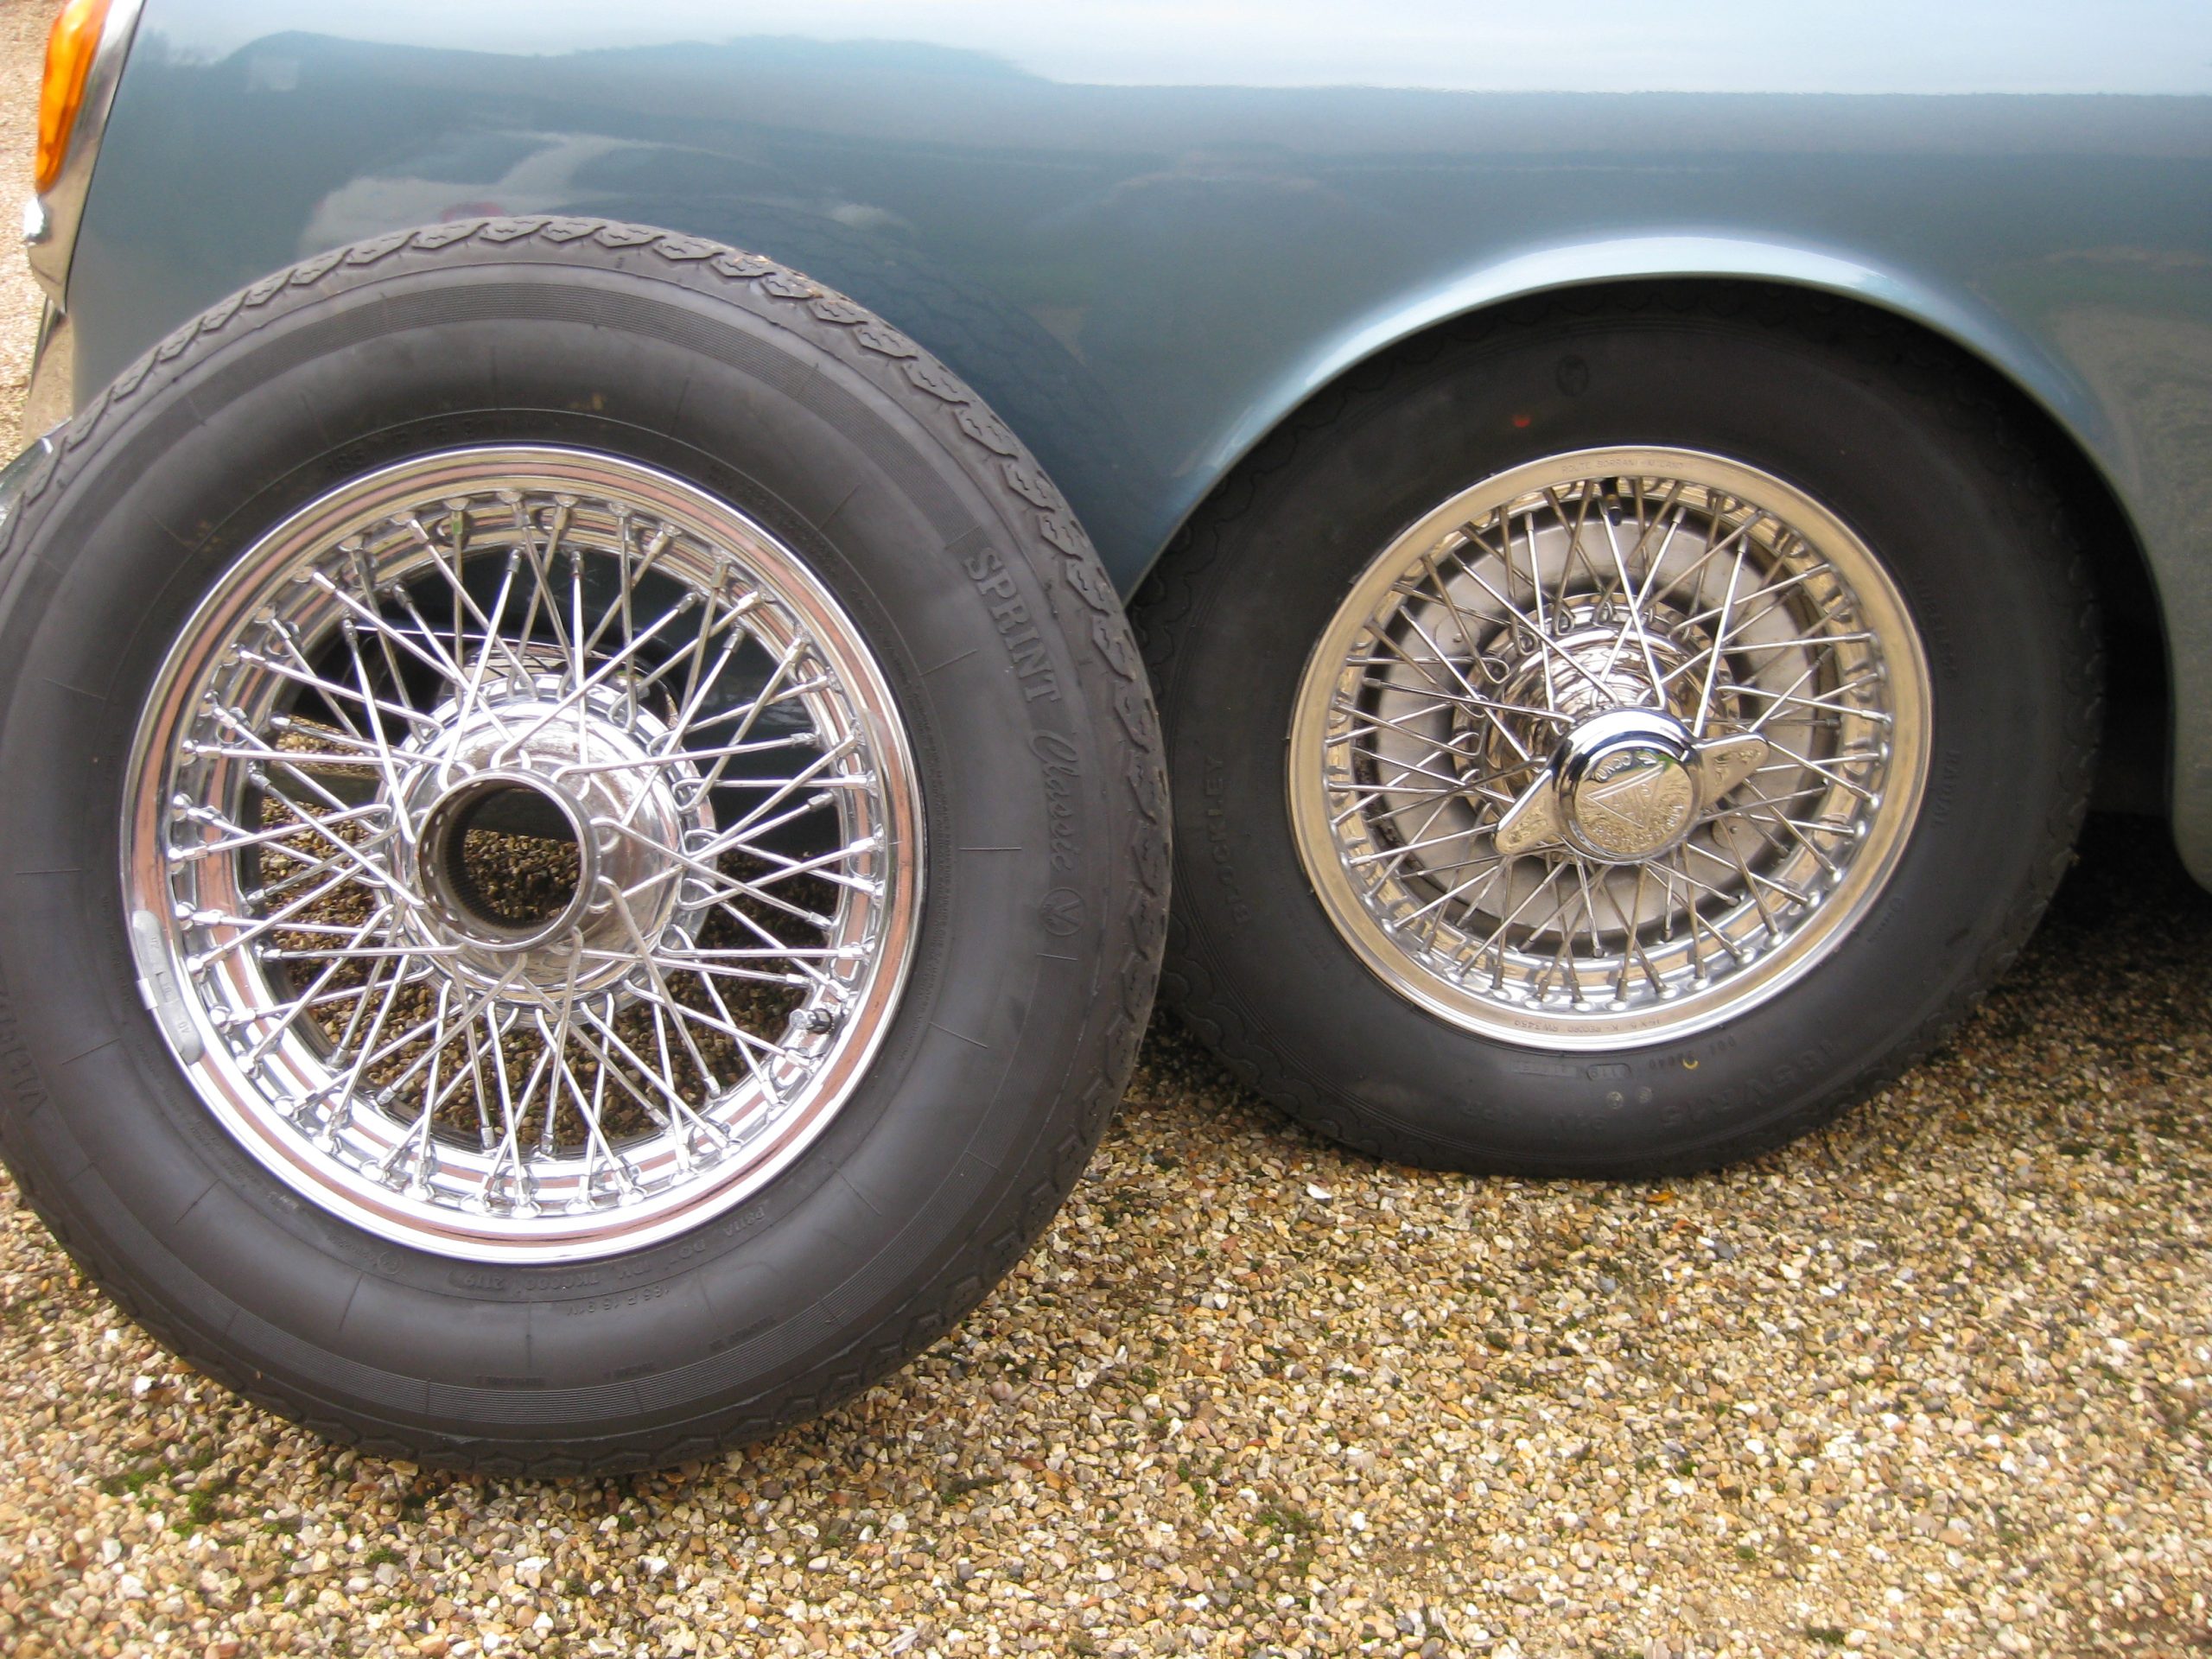 Alvis TC 108G Super 1958 bodied by Hermann Graber; alloy rims, stainless spokes and centres – chrome wheels leaning against for comparison(1)